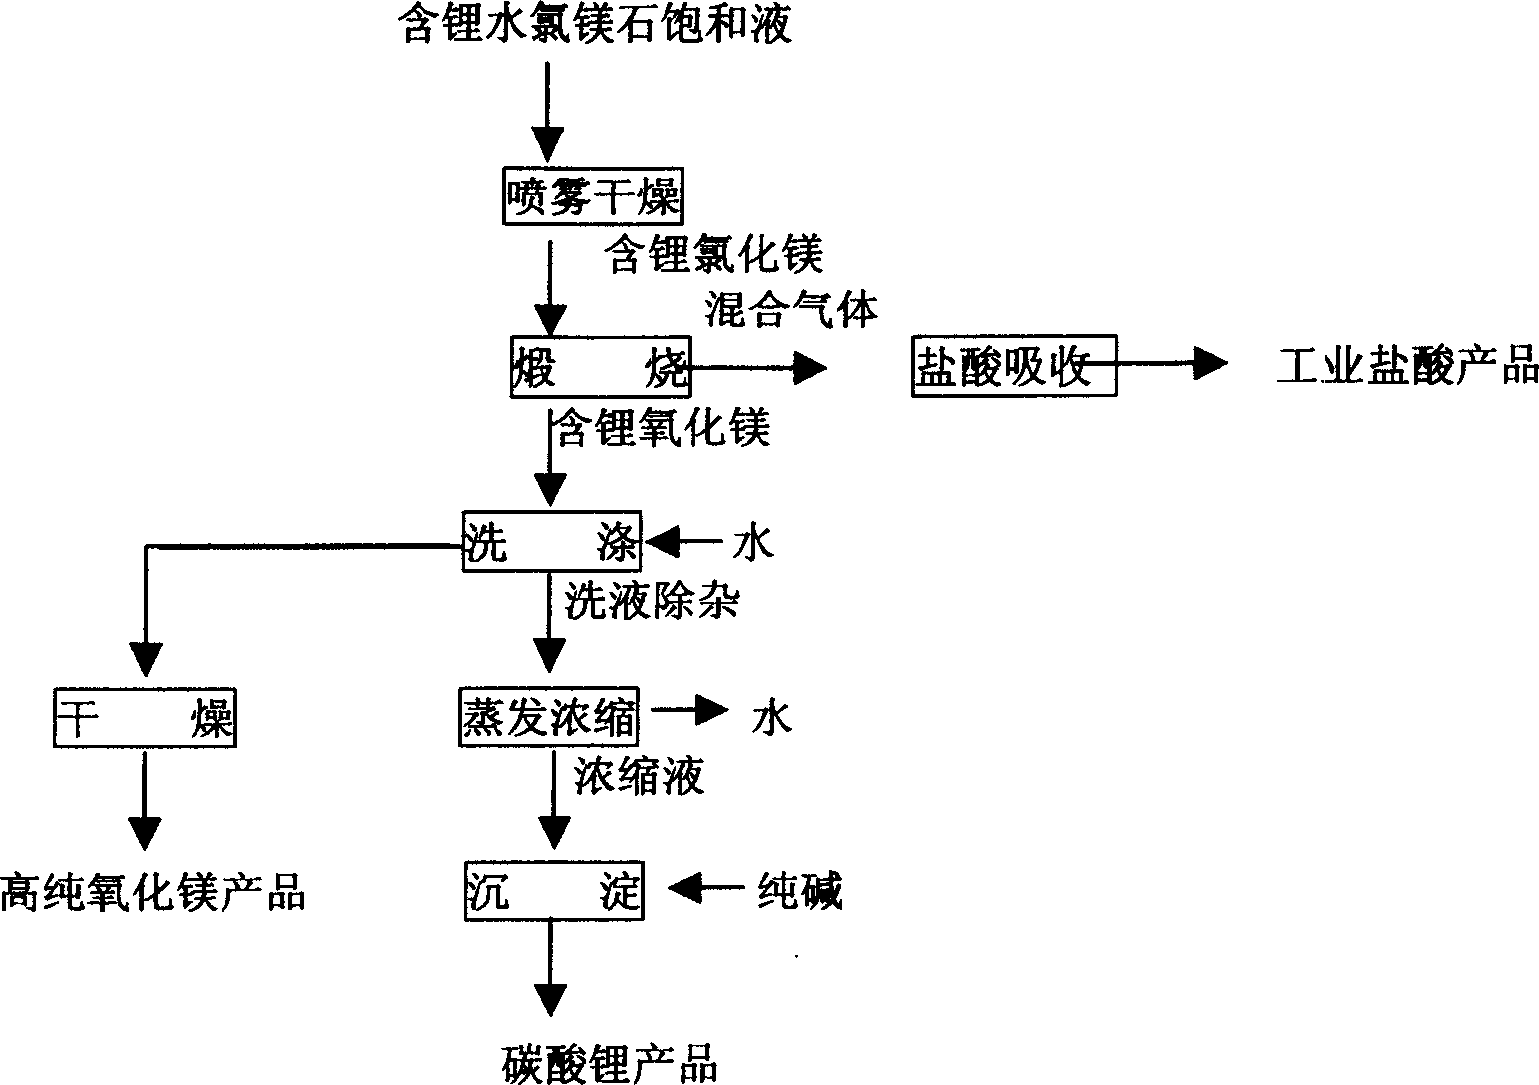 Process for producing lithium carbonate magnesium oxide and hydrogen chloride by high magnesium lithium-containing halogen water